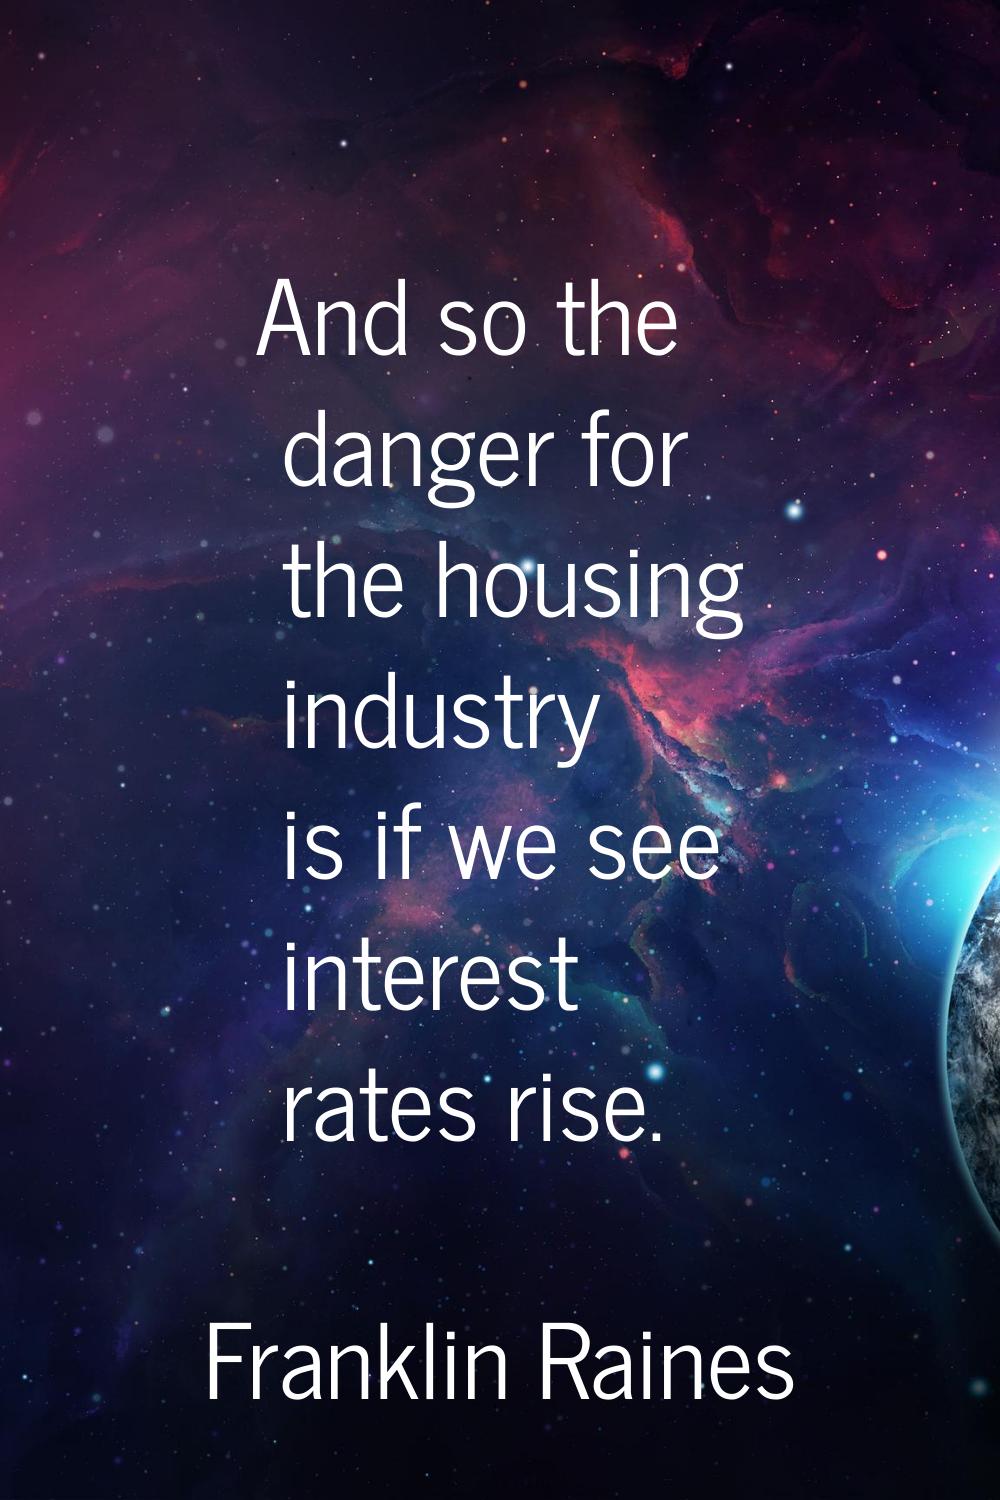 And so the danger for the housing industry is if we see interest rates rise.